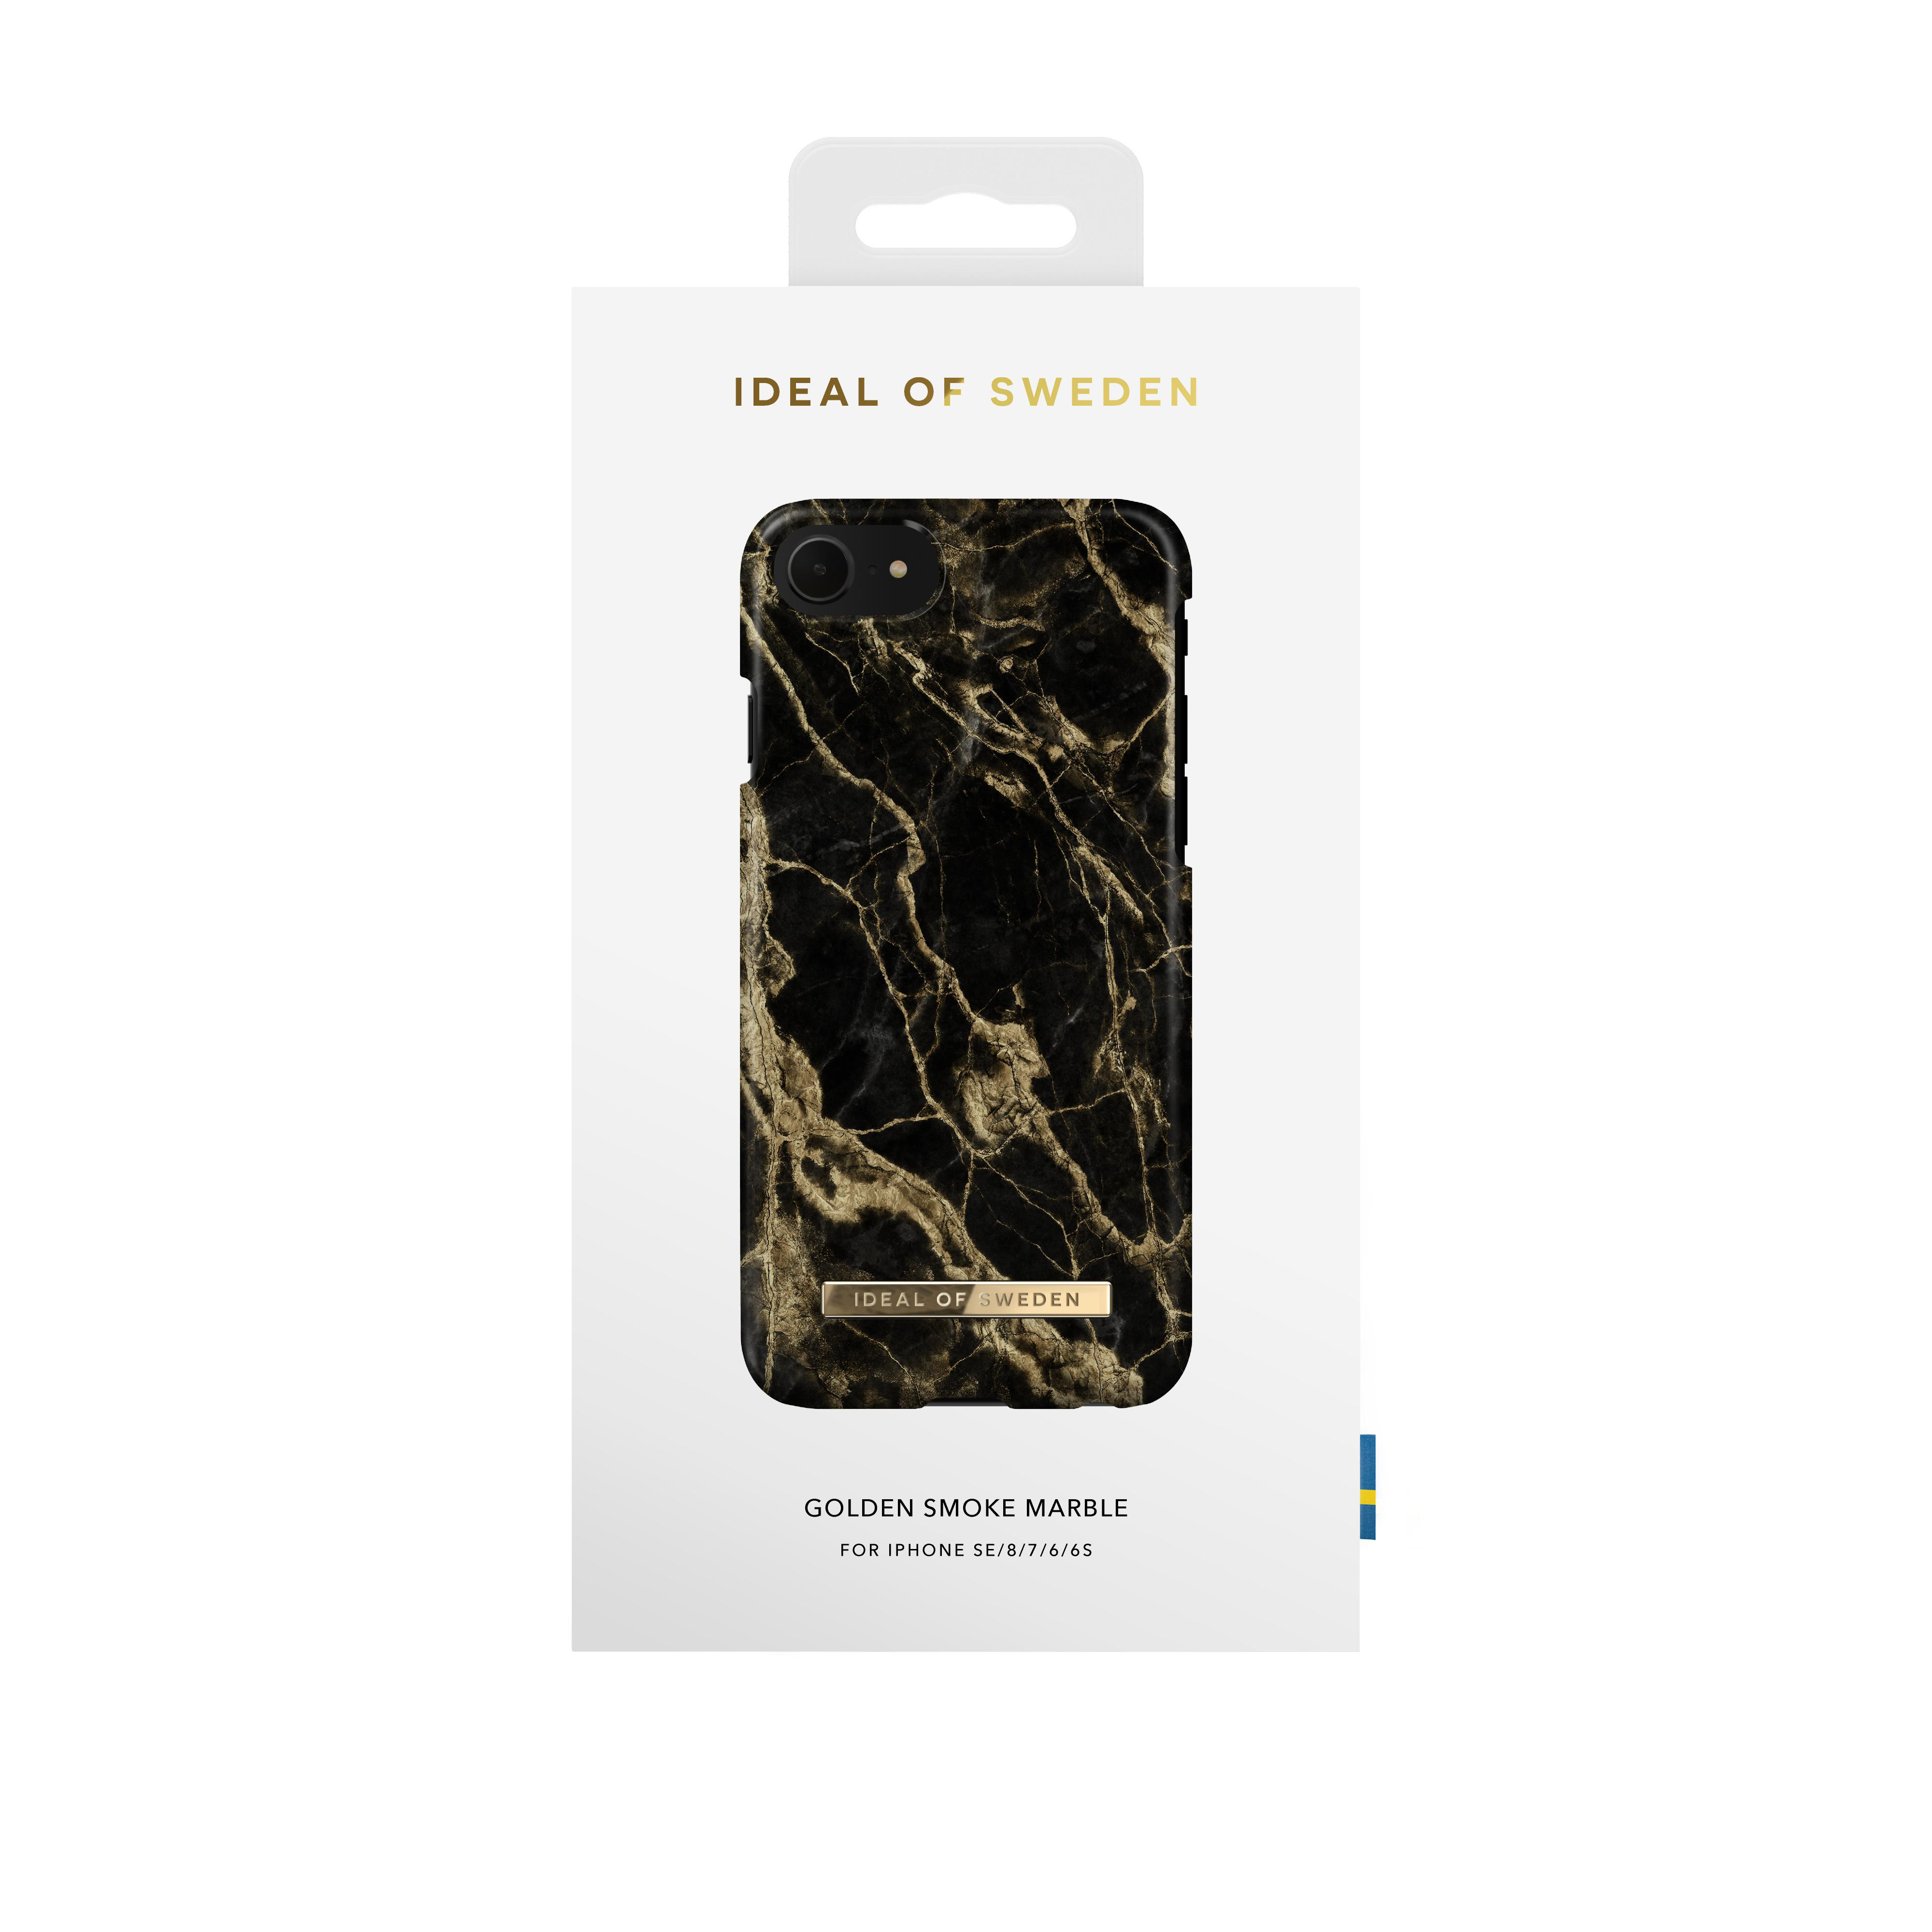 OF IDEAL Black 7, SE, iPhone 6, 8, iPhone Fashion, Apple, Backcover, SWEDEN iPhone iPhone